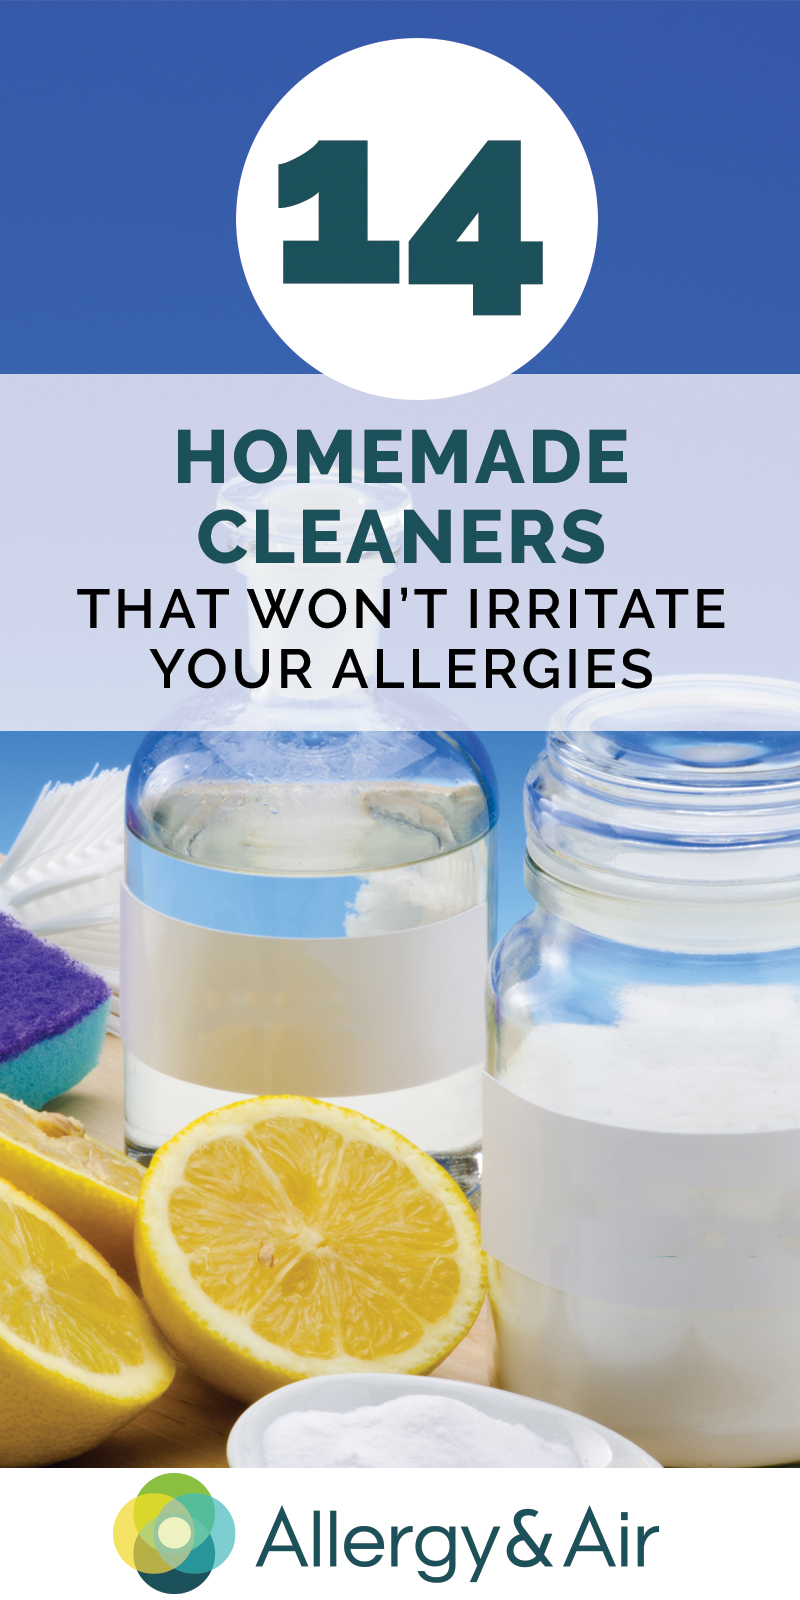 14 Homemade Cleaners That Won't Irritate Your Allergies